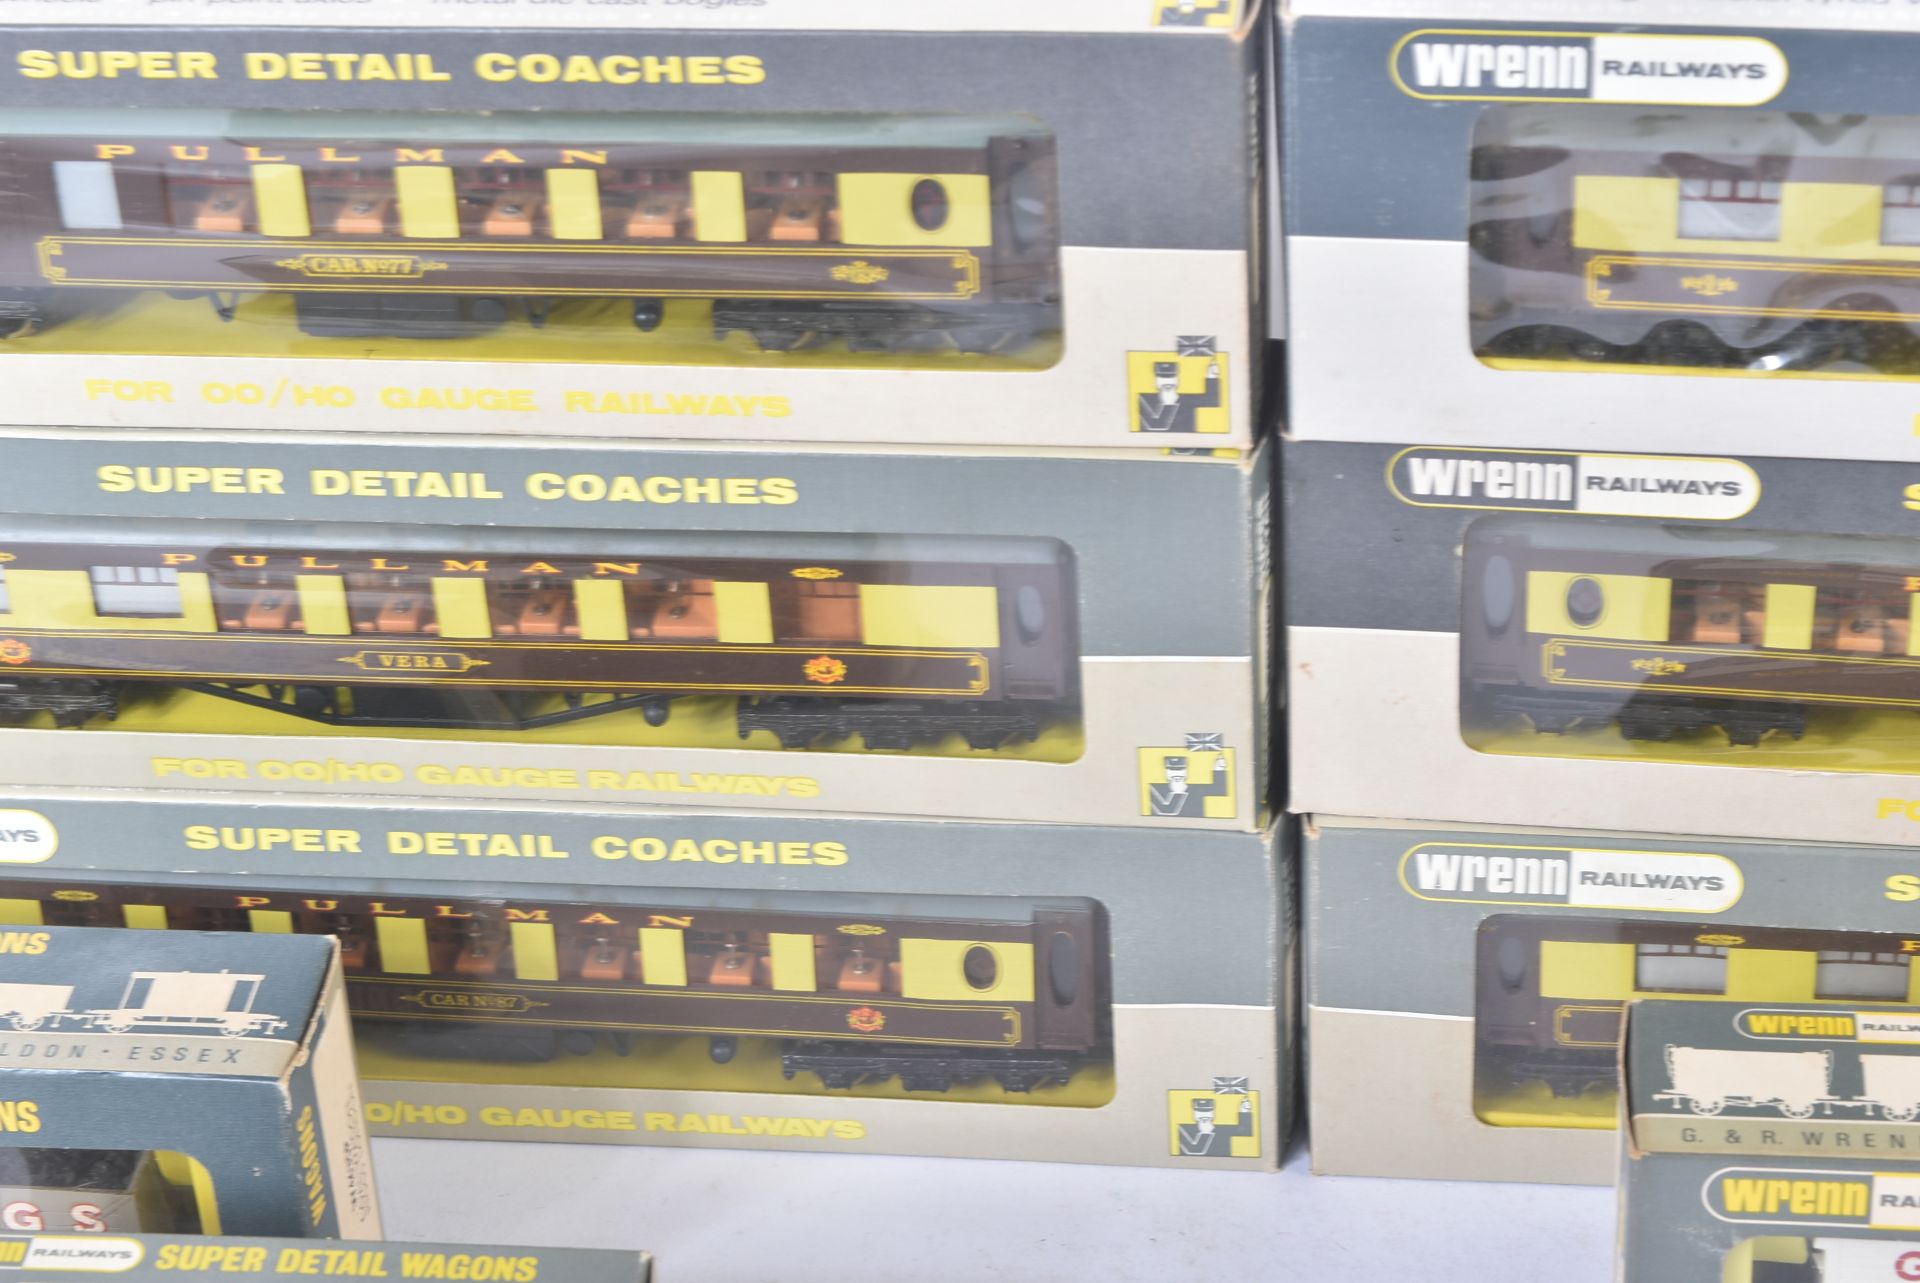 COLLECTION OF WRENN RAILWAYS OO GAUGE ROLLING STOCK / CARRIAGES - Image 8 of 9